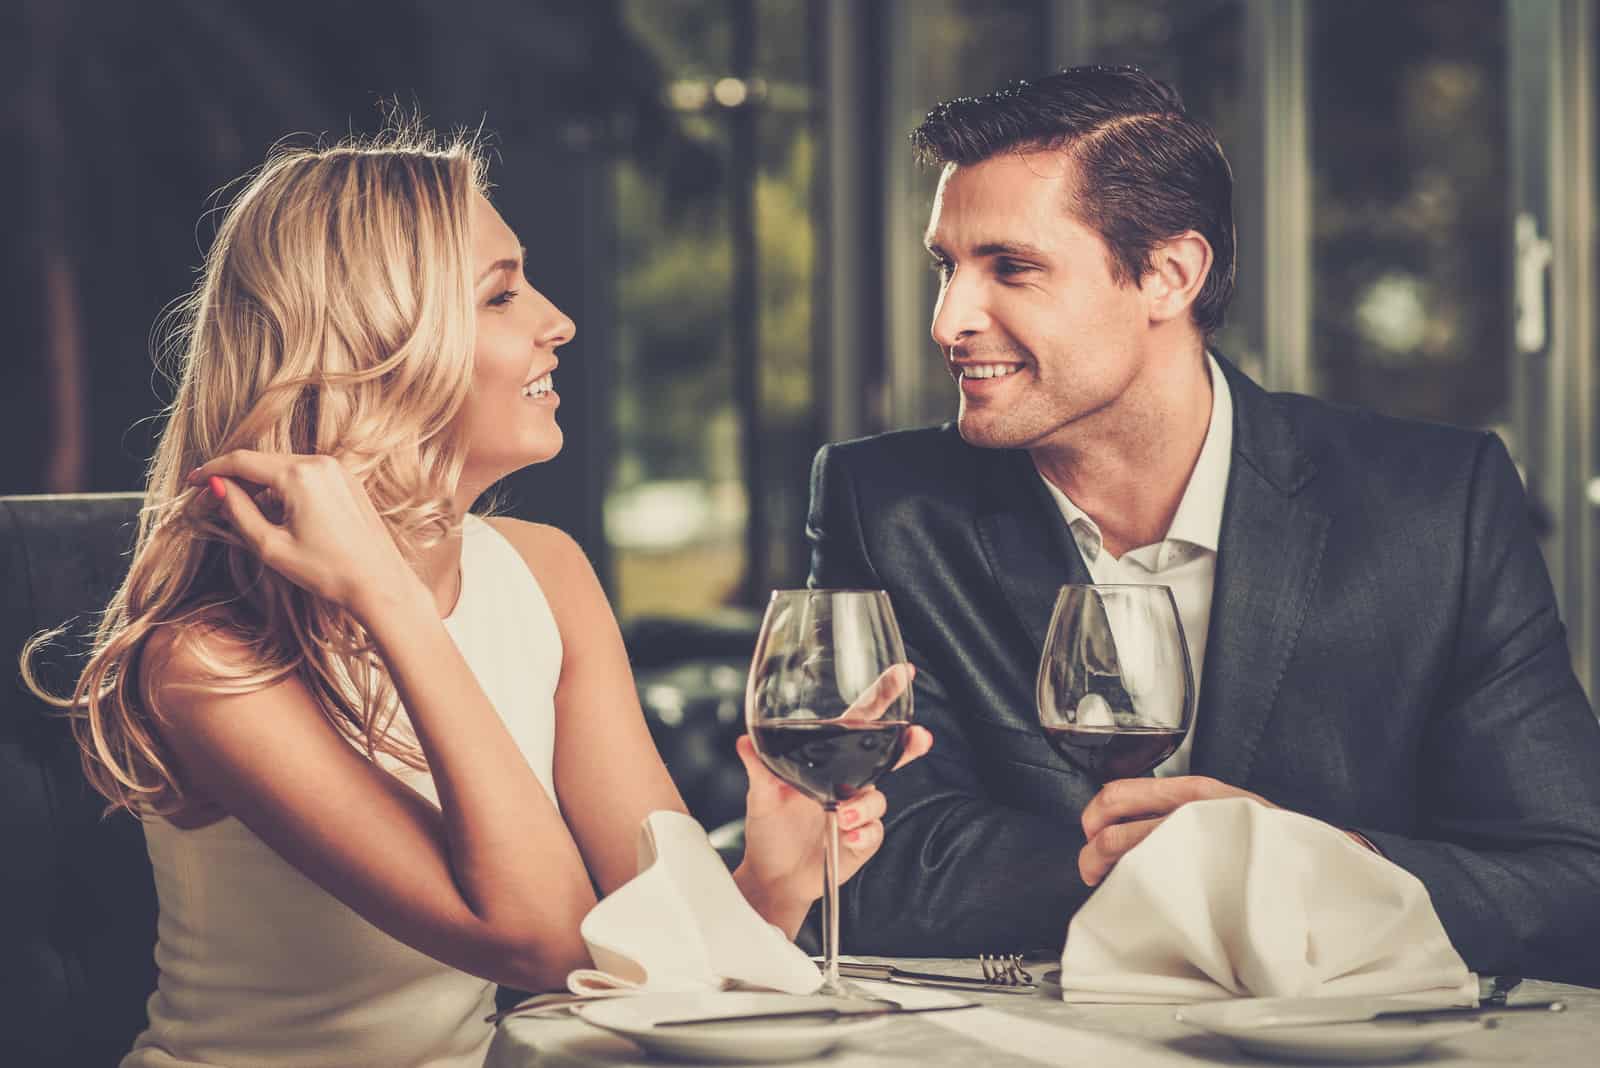 a man and a woman sit at a table drinking wine and laughing